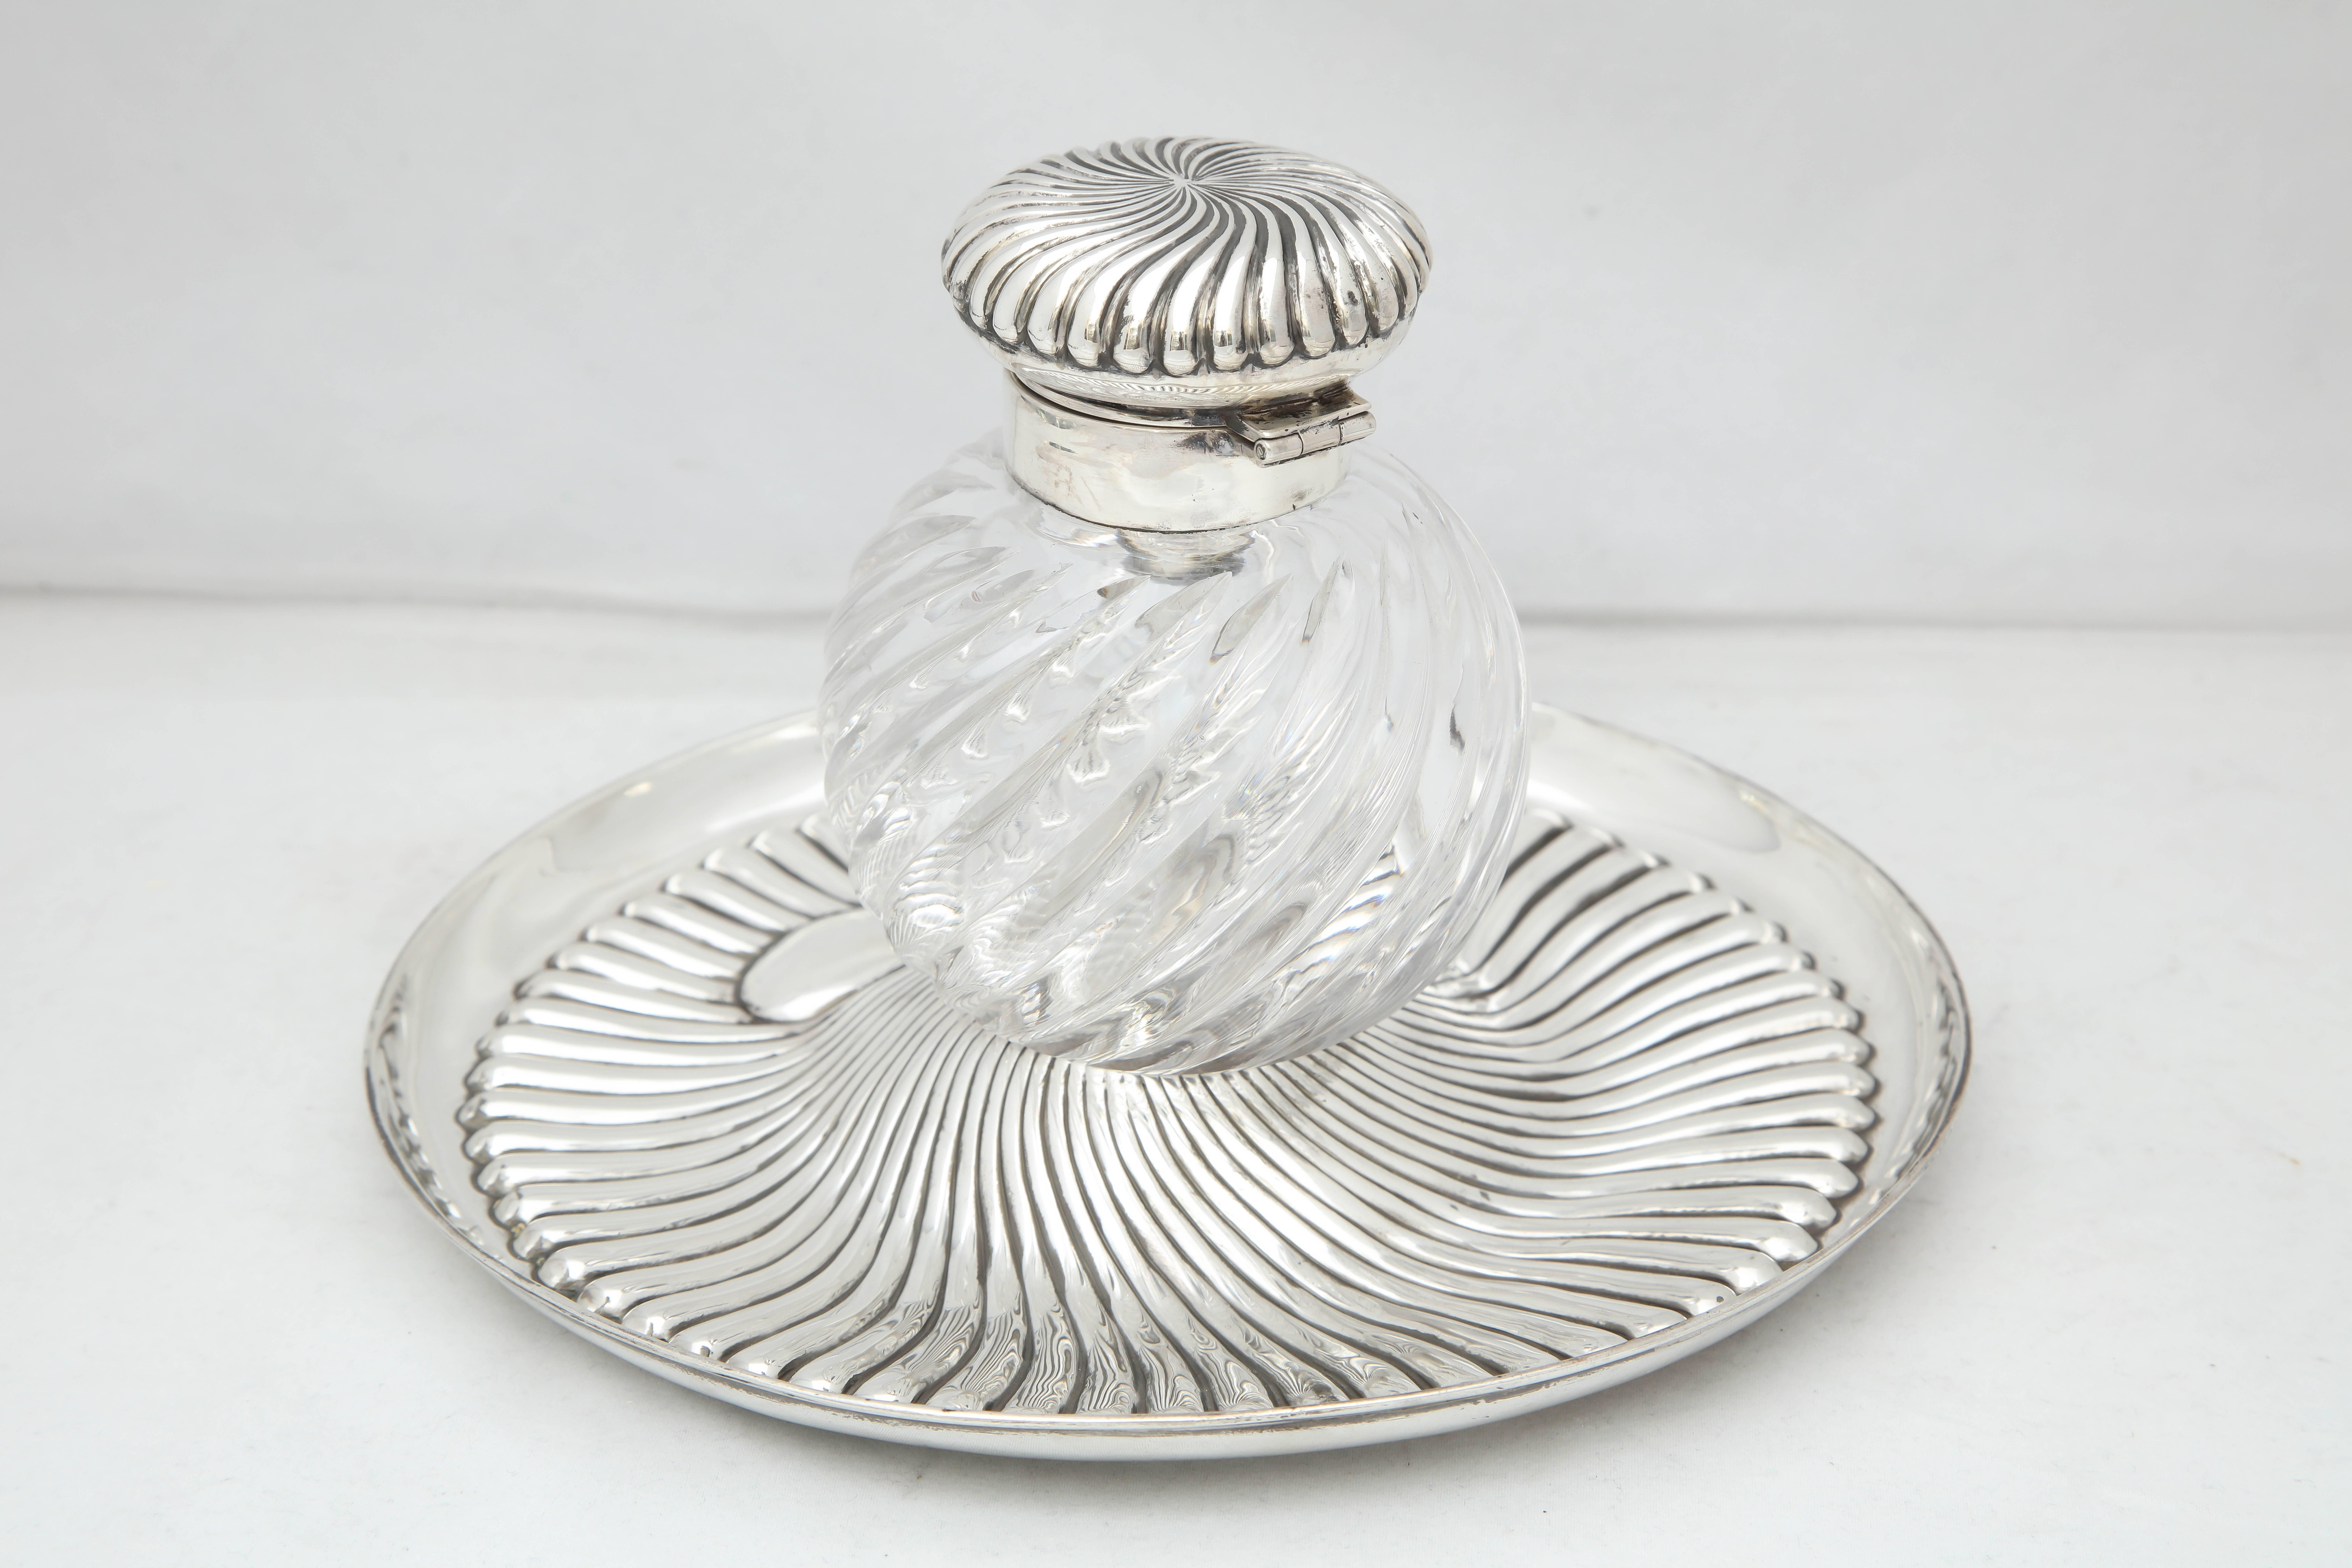 Late 19th Century Rare Very Large Unusual Victorian Sterling Silver-Mounted Inkwell on Stand